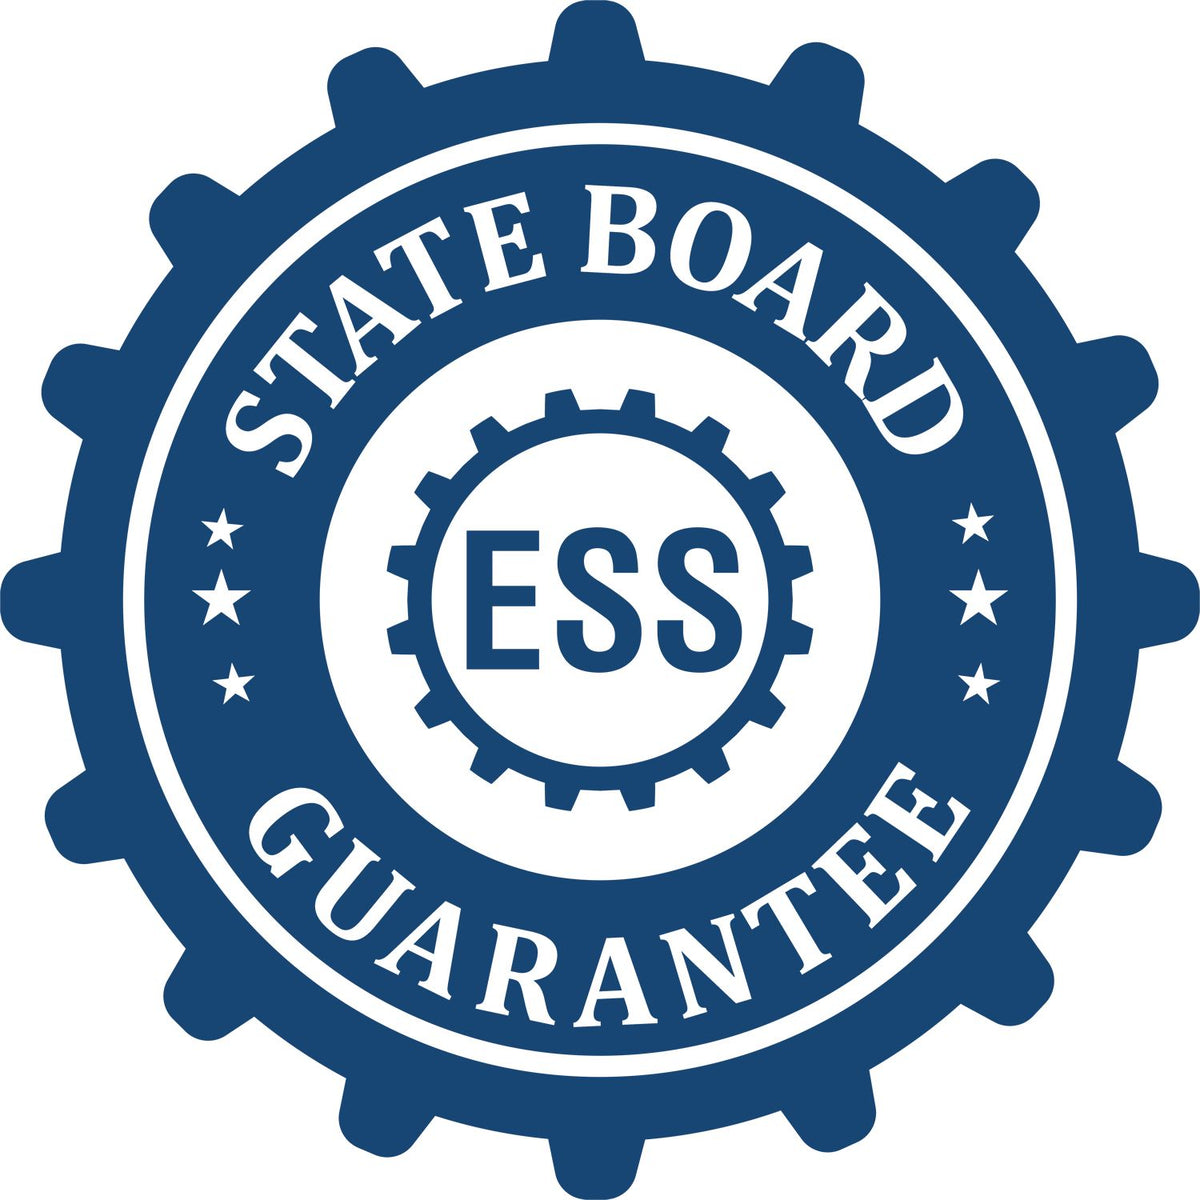 An emblem in a gear shape illustrating a state board guarantee for the Soft Mississippi Professional Engineer Seal product.